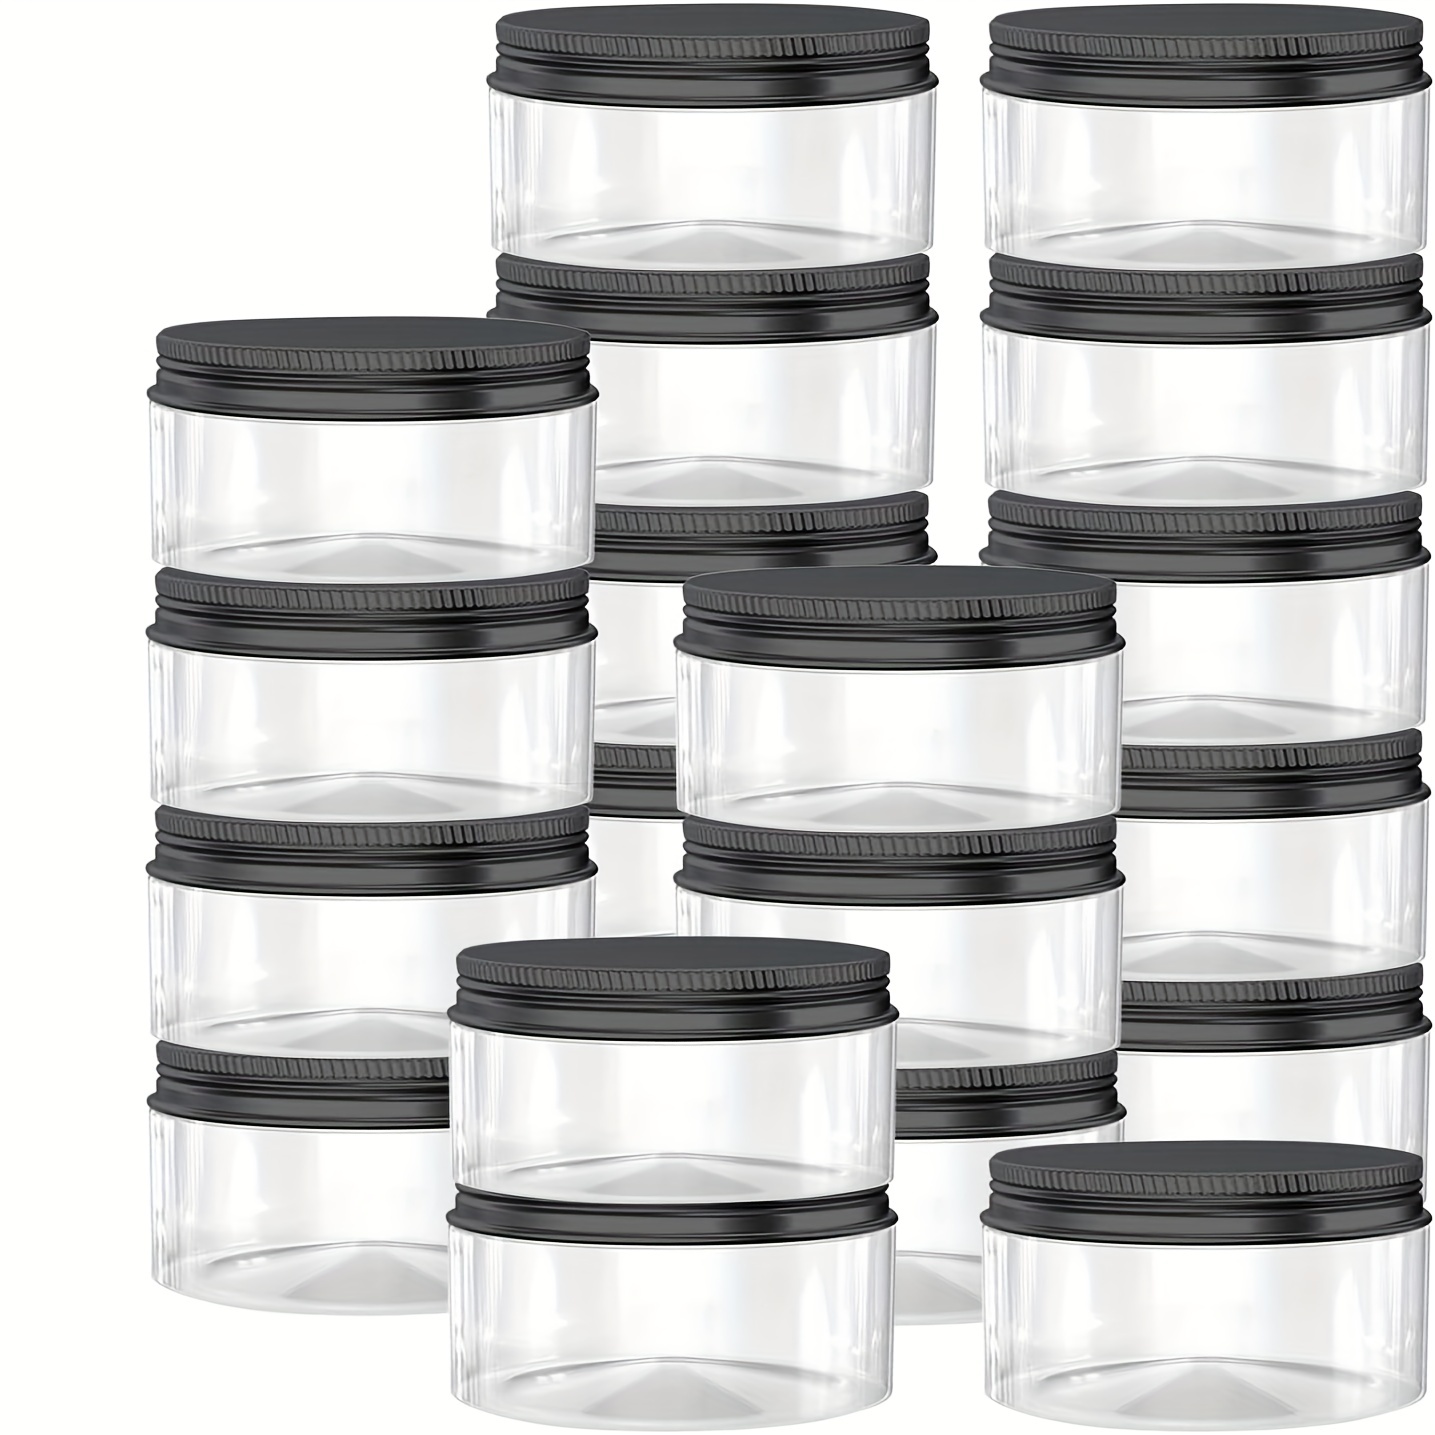 4oz + 0.7oz set of 24pcs Slime Containers with Lids